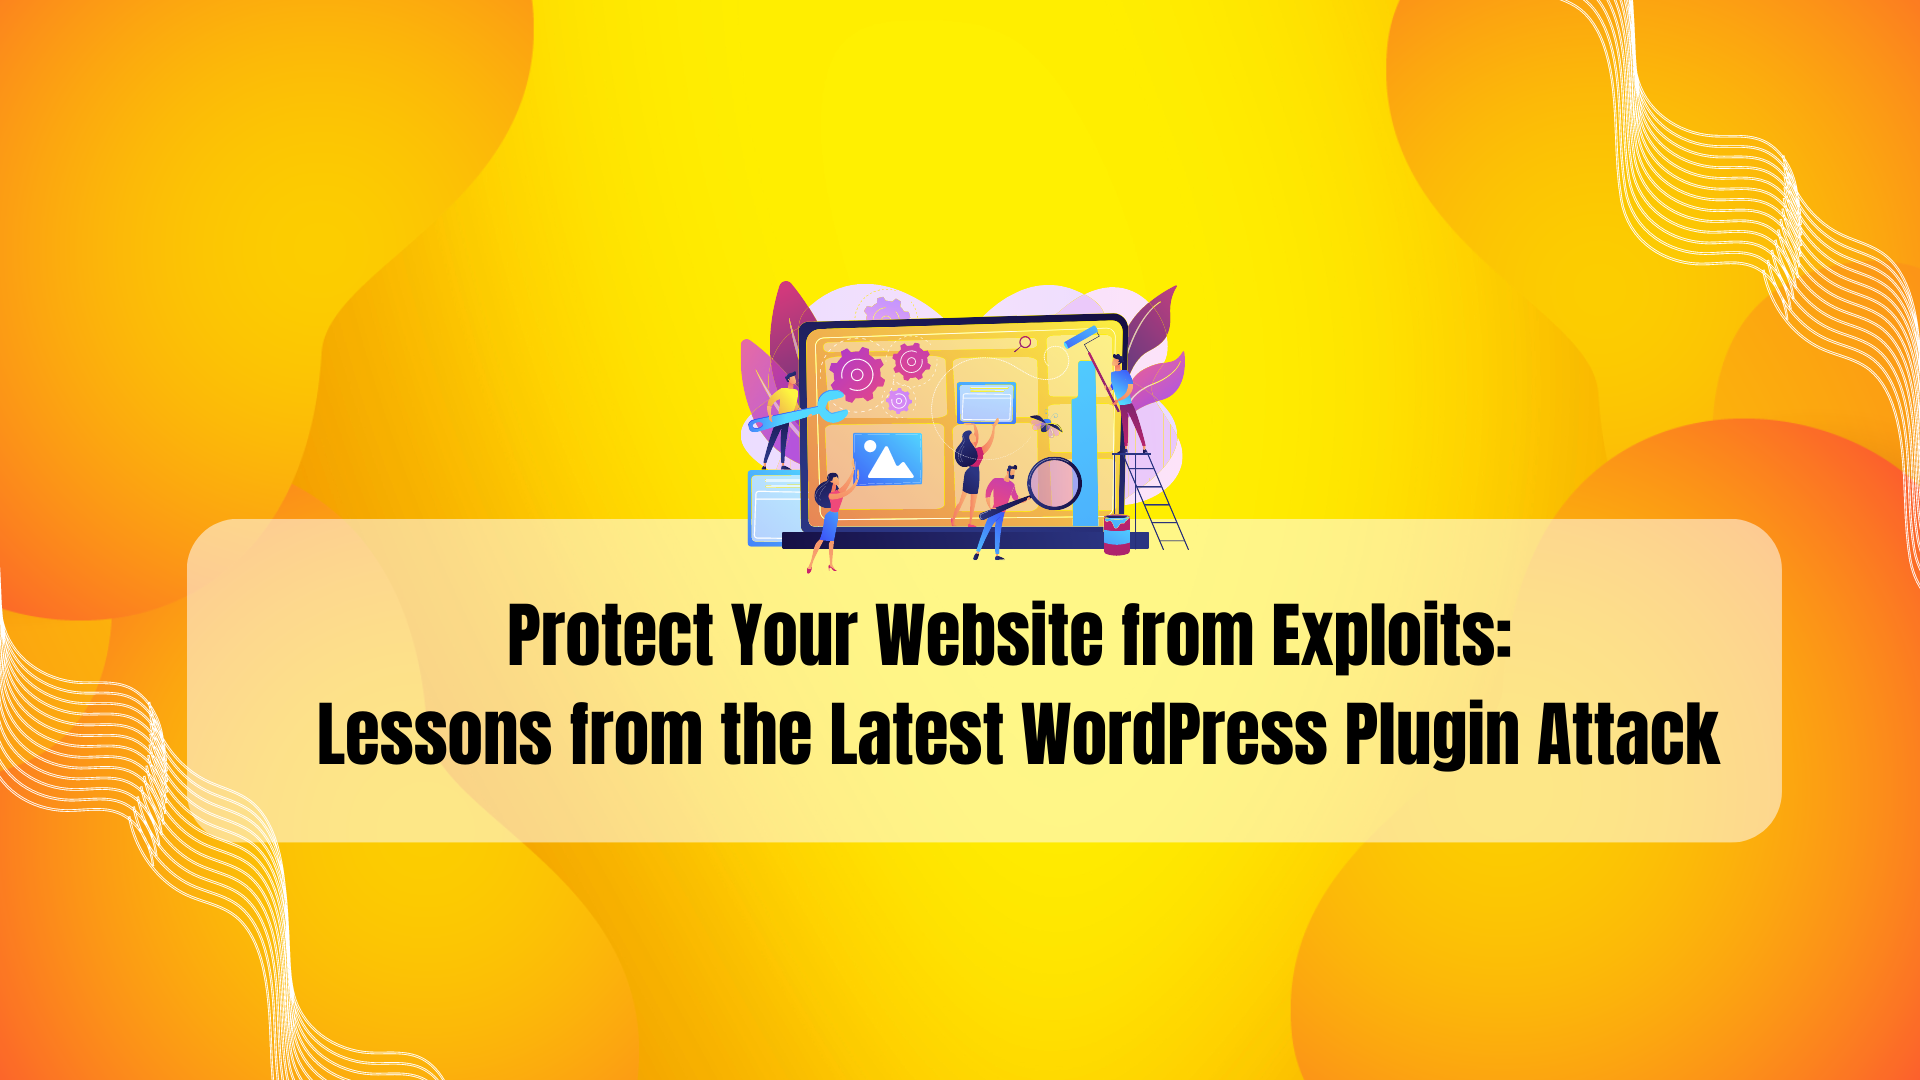 Protect Your Website from Exploits Lessons from the Latest WordPress Plugin Attack